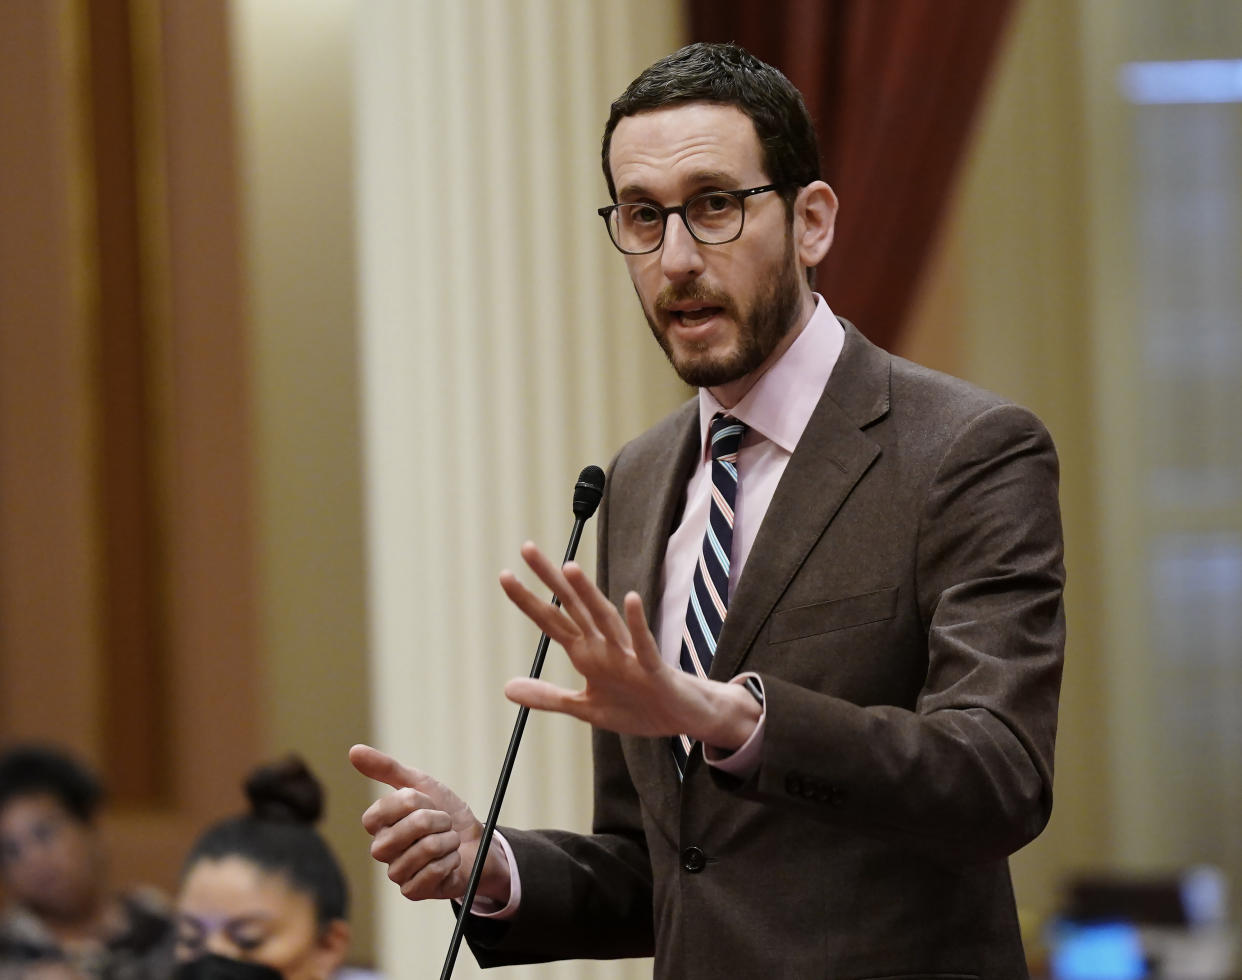 FILE - California state Sen. Scott Wiener, D-San Francisco, speaks on a measure at the Capitol in Sacramento, Calif., on March 31, 2022. Wiener announced, Wednesday, Aug. 31, 2022, that he will not put his bill up for a vote that would have allowed teens age 15 and up to get the coronavirus vaccine without parental consent, saying it didn't have enough support to clear the state Assembly. (AP Photo/Rich Pedroncelli, File)